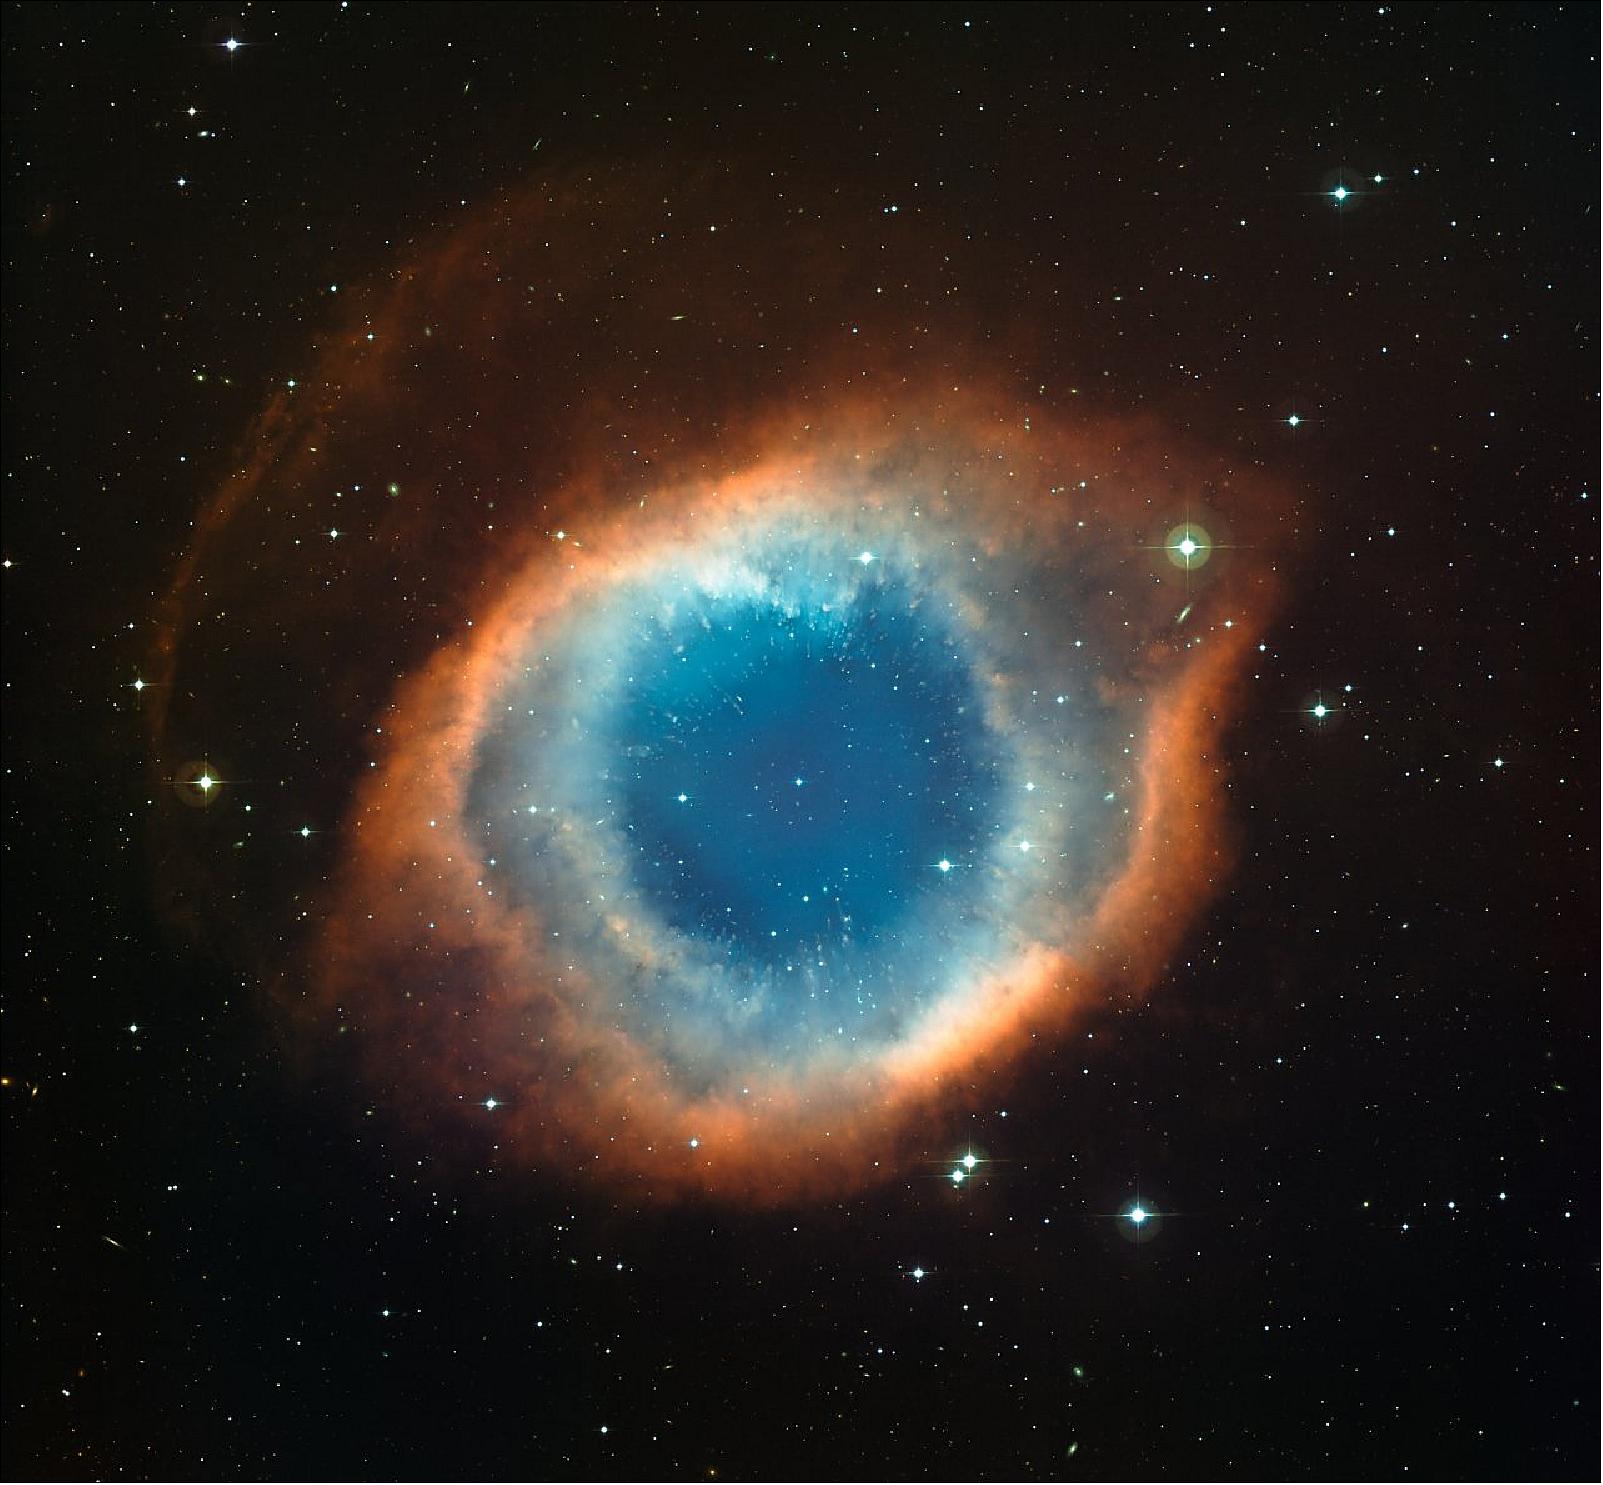 Figure 18: This color-composite image (Figure 18) of the Helix Nebula (NGC 7293) was created from images obtained using the Wide Field Imager (WFI), an astronomical camera attached to the 2.2 m MPG /ESO telescope at the La Silla observatory in Chile. The blue-green glow in the center of the Helix comes from oxygen atoms shining under effects of the intense ultraviolet radiation of the 120 000 degree Celsius central star and the hot gas. Further out from the star and beyond the ring of knots, the red color from hydrogen and nitrogen is more prominent. A careful look at the central part of this object reveals not only the knots, but also many remote galaxies seen right through the thinly spread glowing gas. This image was created from images through blue, green and red filters and the total exposure times were 12 minutes, 9 minutes and 7 minutes, respectively (image credit: ESO)